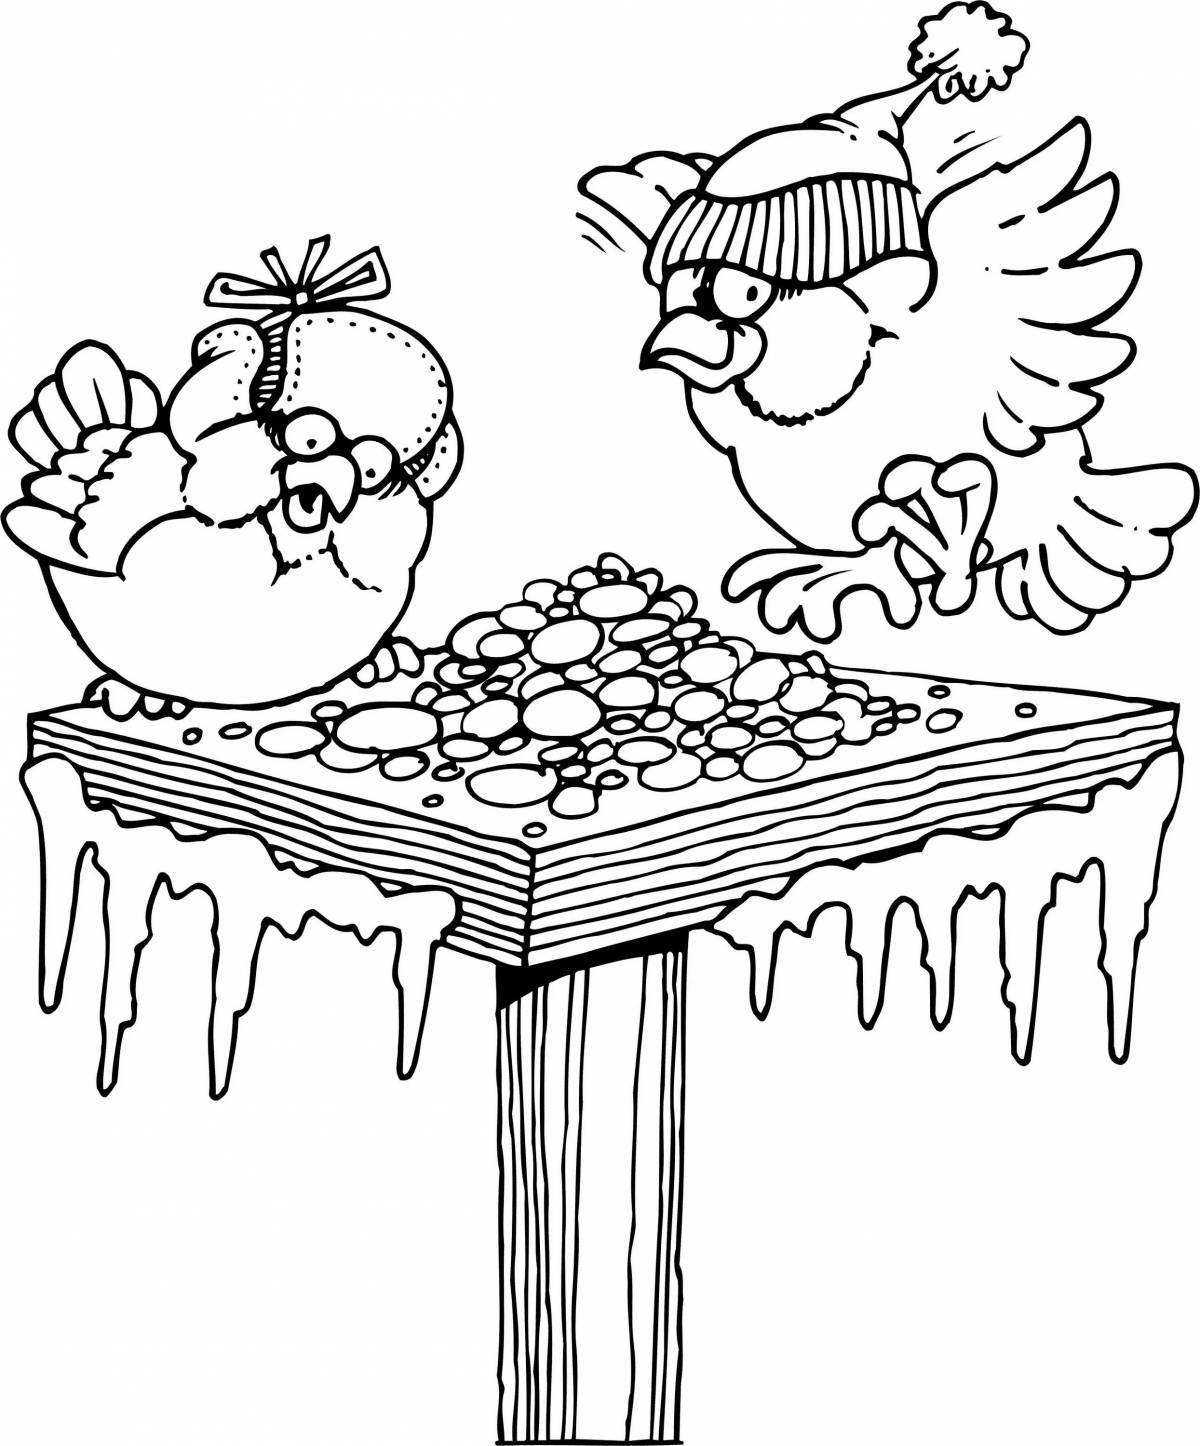 Playful winter birds coloring pages for kids